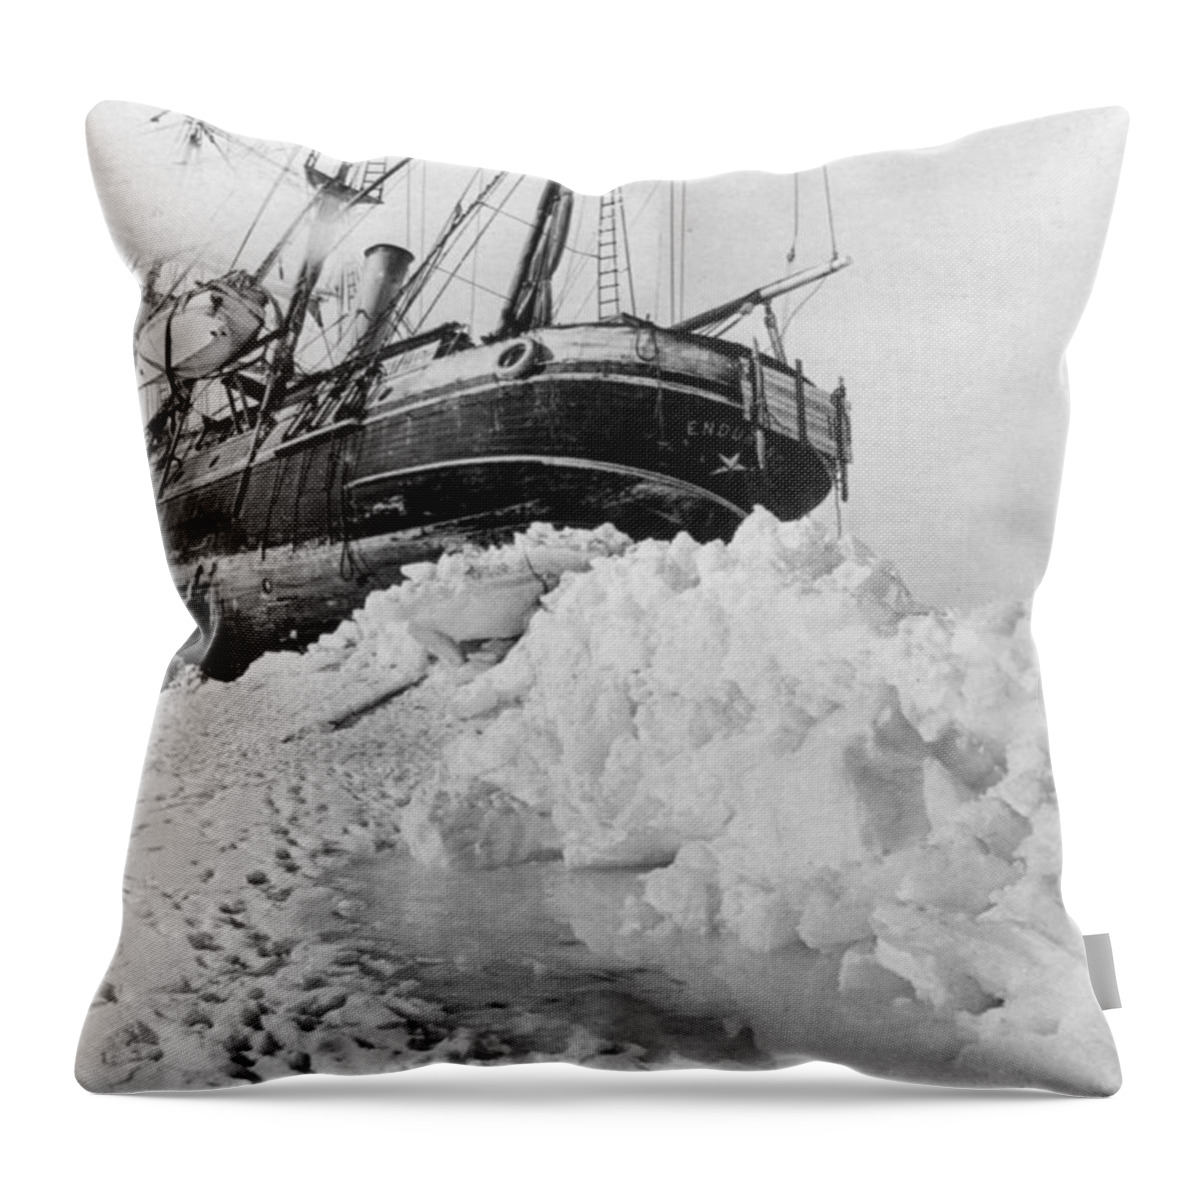 Navigation Throw Pillow featuring the photograph Last Moments Of Shackletons Endurance by Science Source